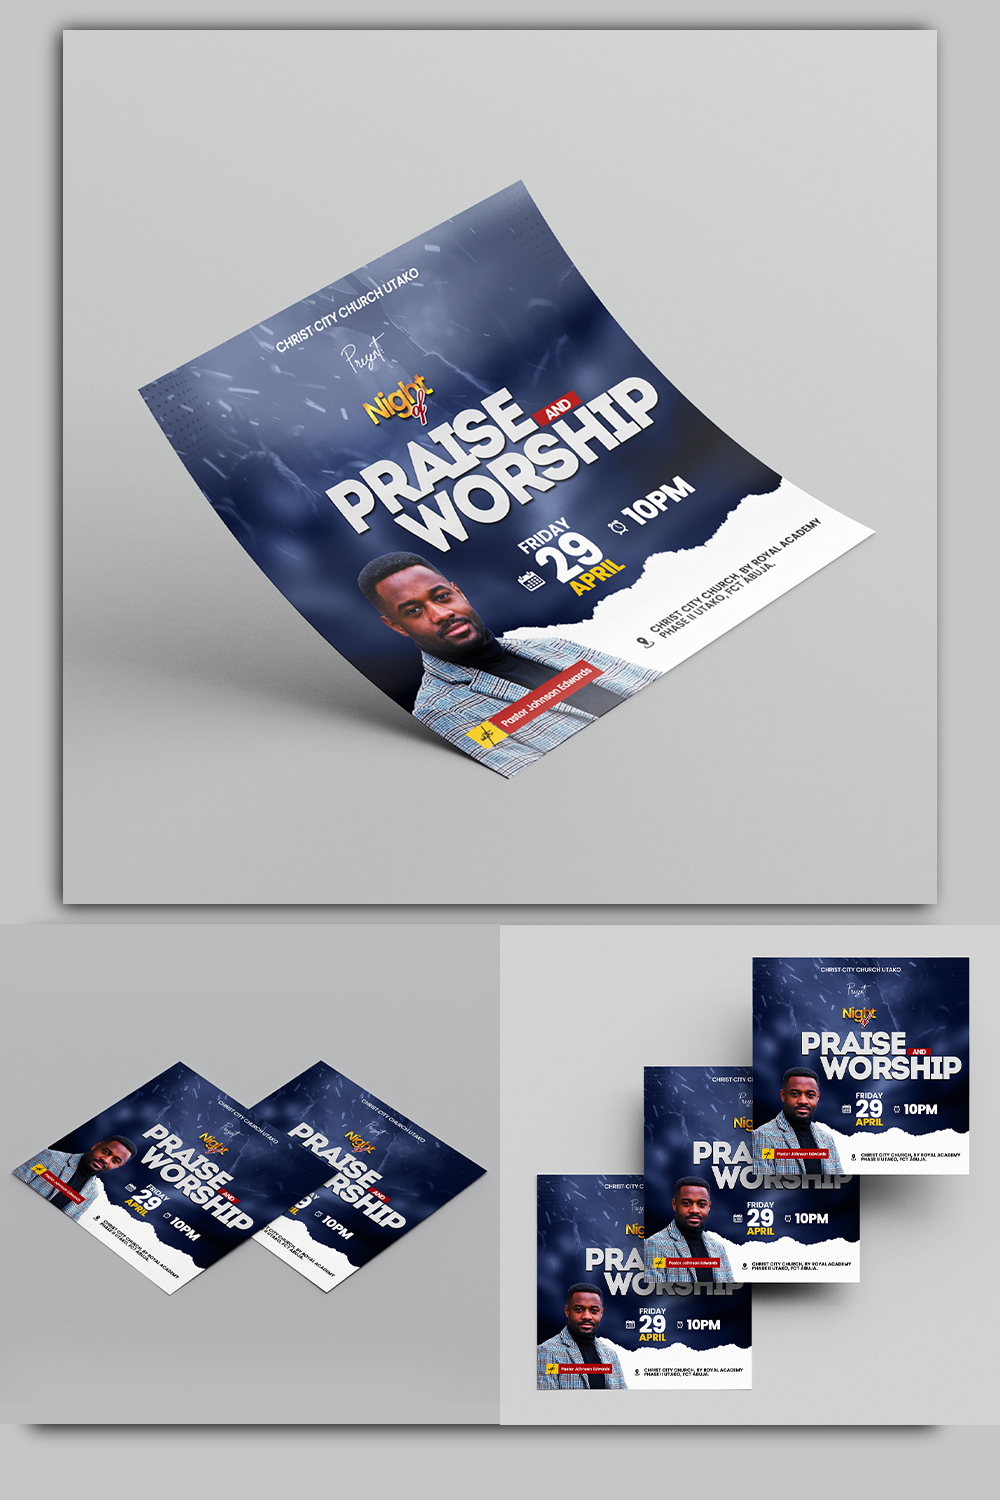 Night of Praise and Worship Flyer Design Template pinterest image.